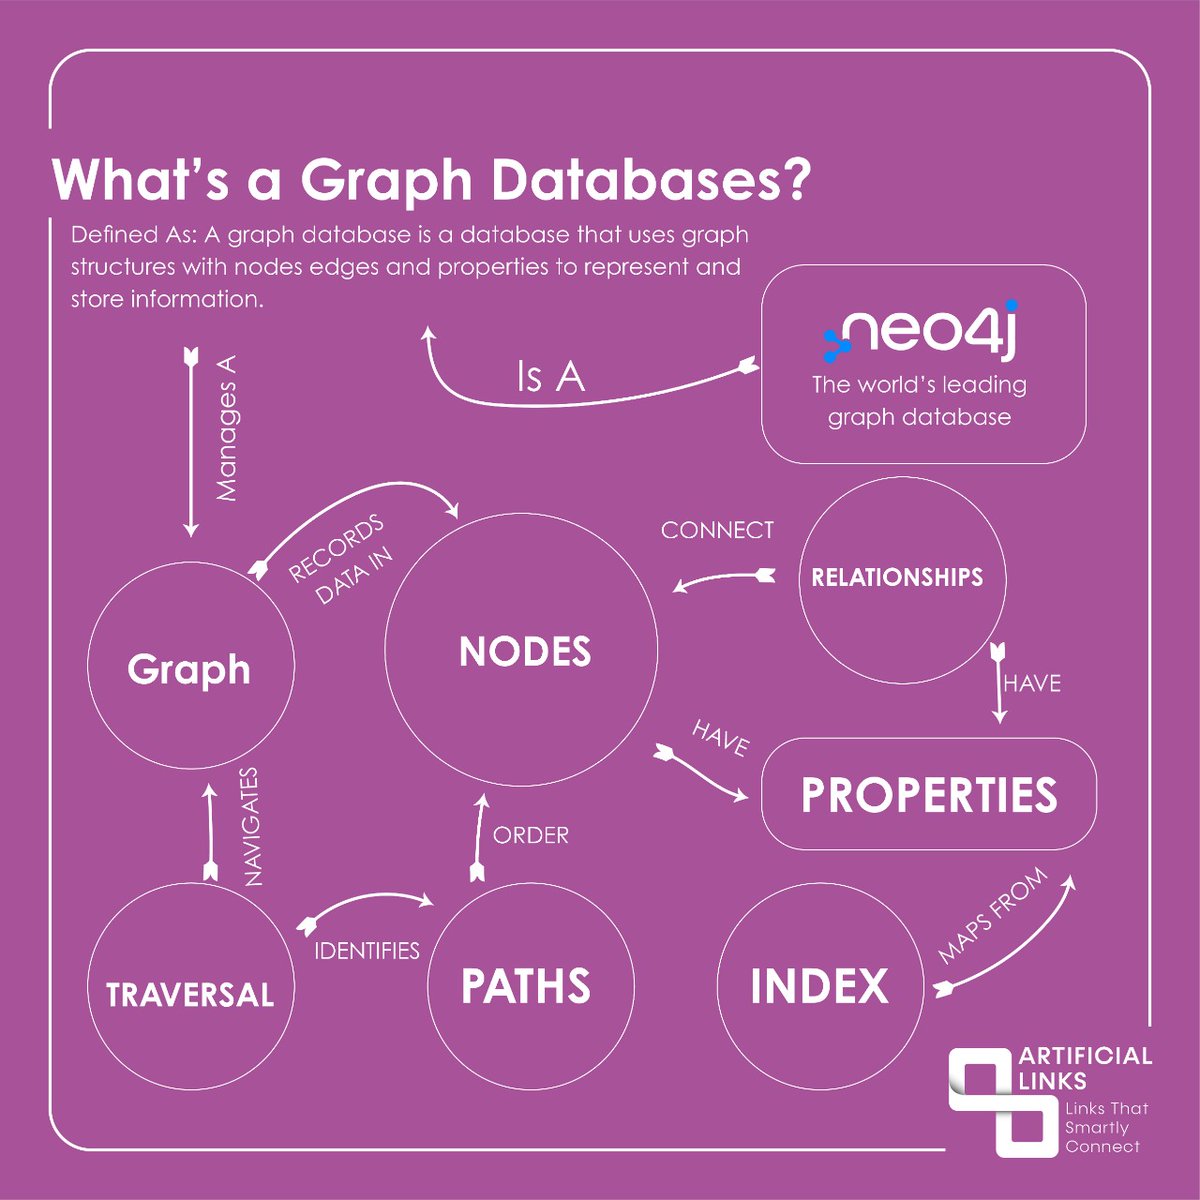 What's a Graph Database? To know more visit our website: artificiallinks.com #graphs #graphdatabase #artificialintelligence #riyadh #neo4j #neo4jconsultancy #consultancy